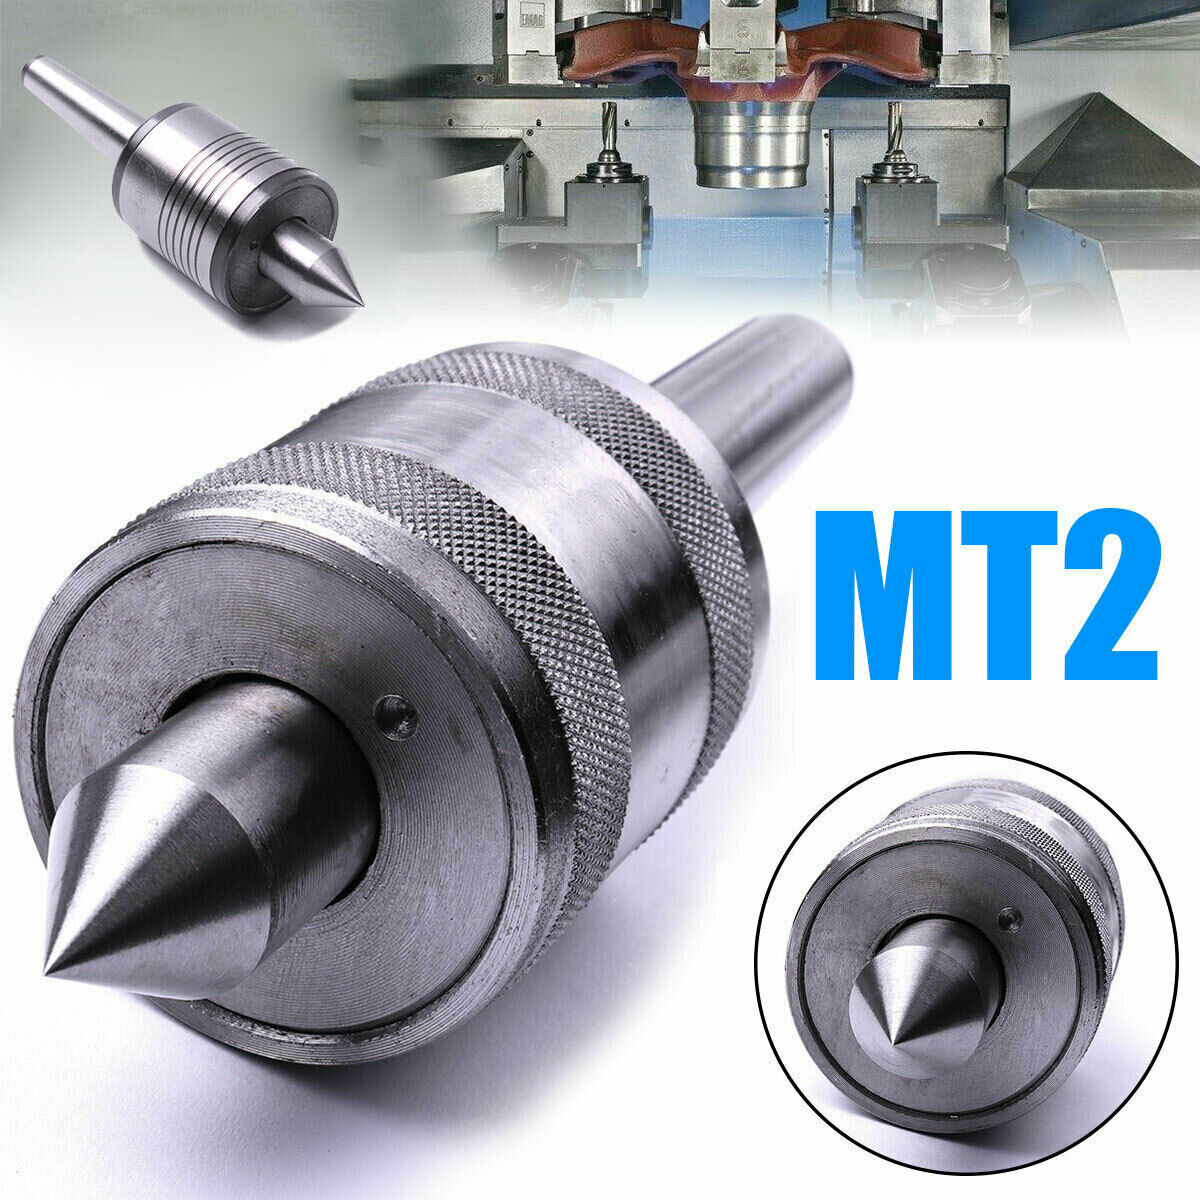 MT2 Live Center Taper High Accuracy Triple Bearing Spindle Lathe Milling Chuck